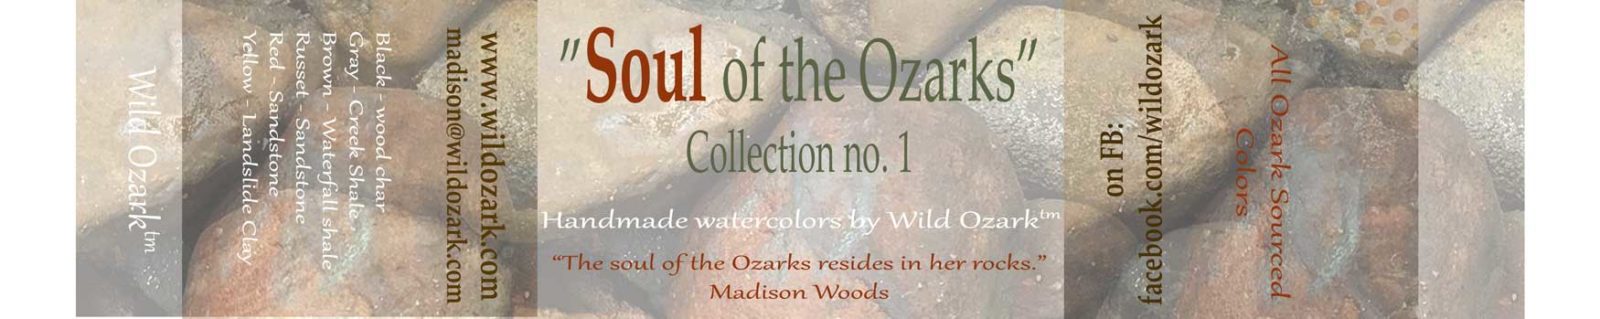 Wrapper for the Soul of the Ozarks watercolor paint tin.